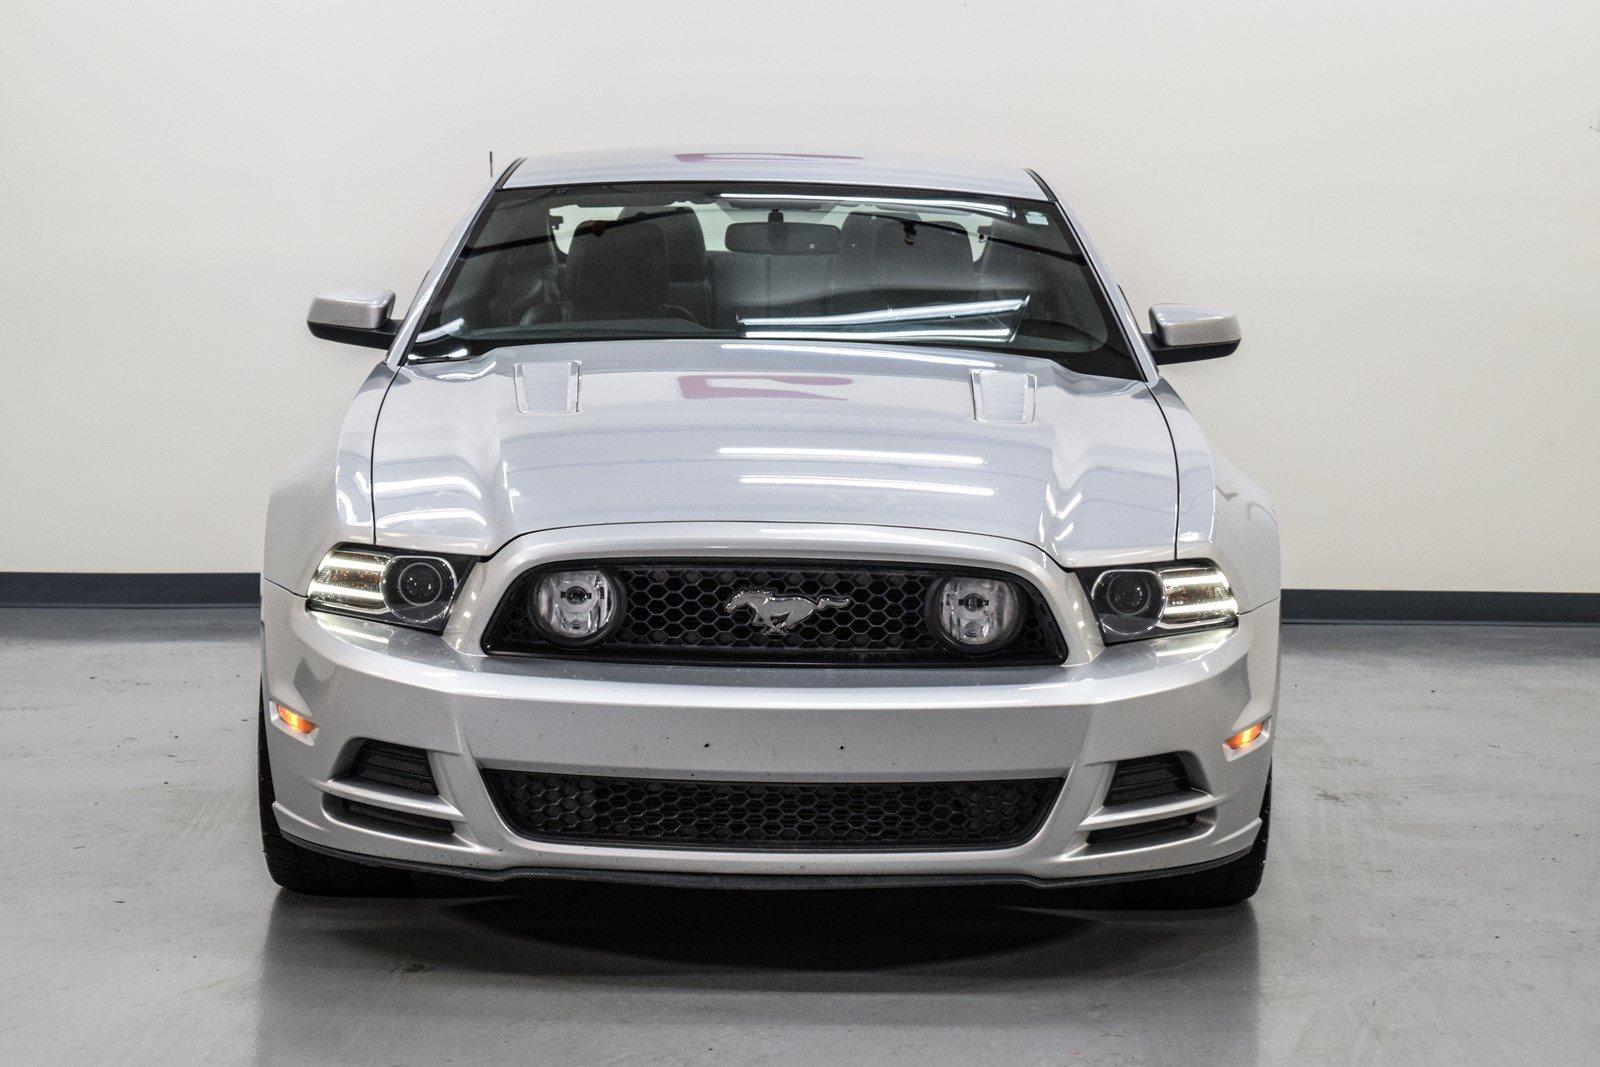 Used 2013 Ford Mustang GT Premium for sale Sold at Gravity Autos Marietta in Marietta GA 30060 3